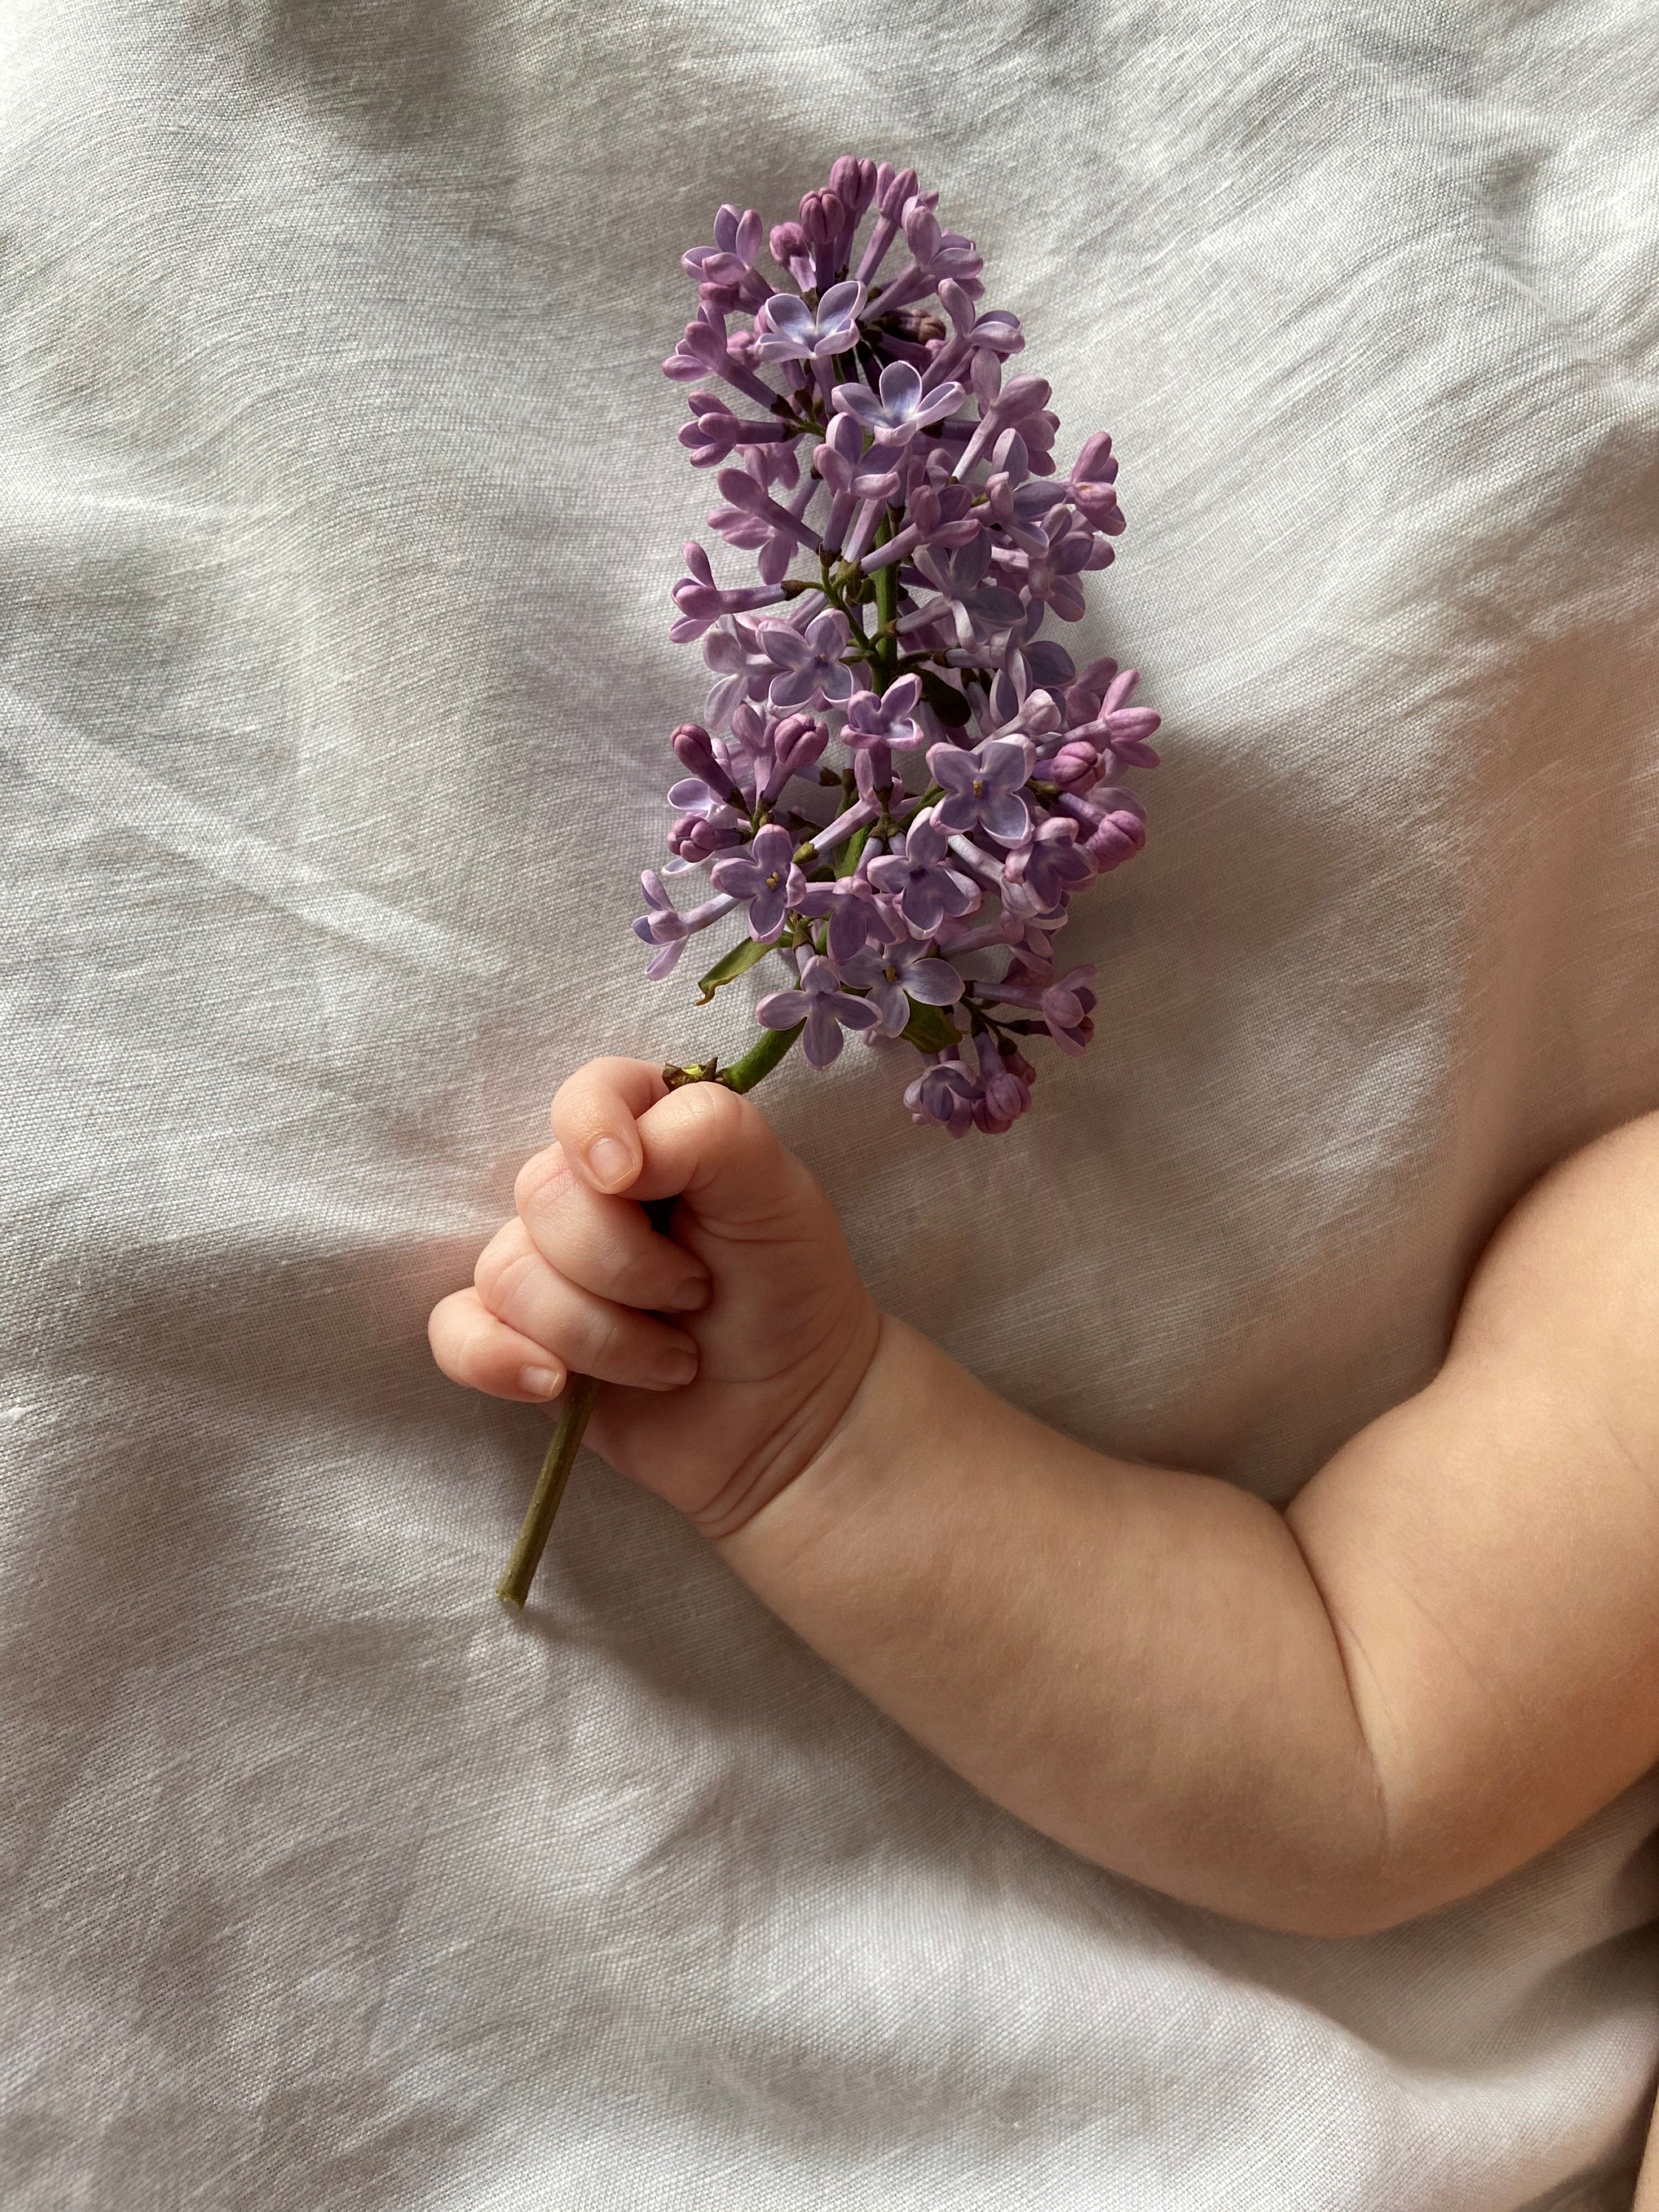 Baby's arm holding a beautiful purple spring bloom while lying on a white muslin sheet | Parenting tips and advice - Clair de Lune UK